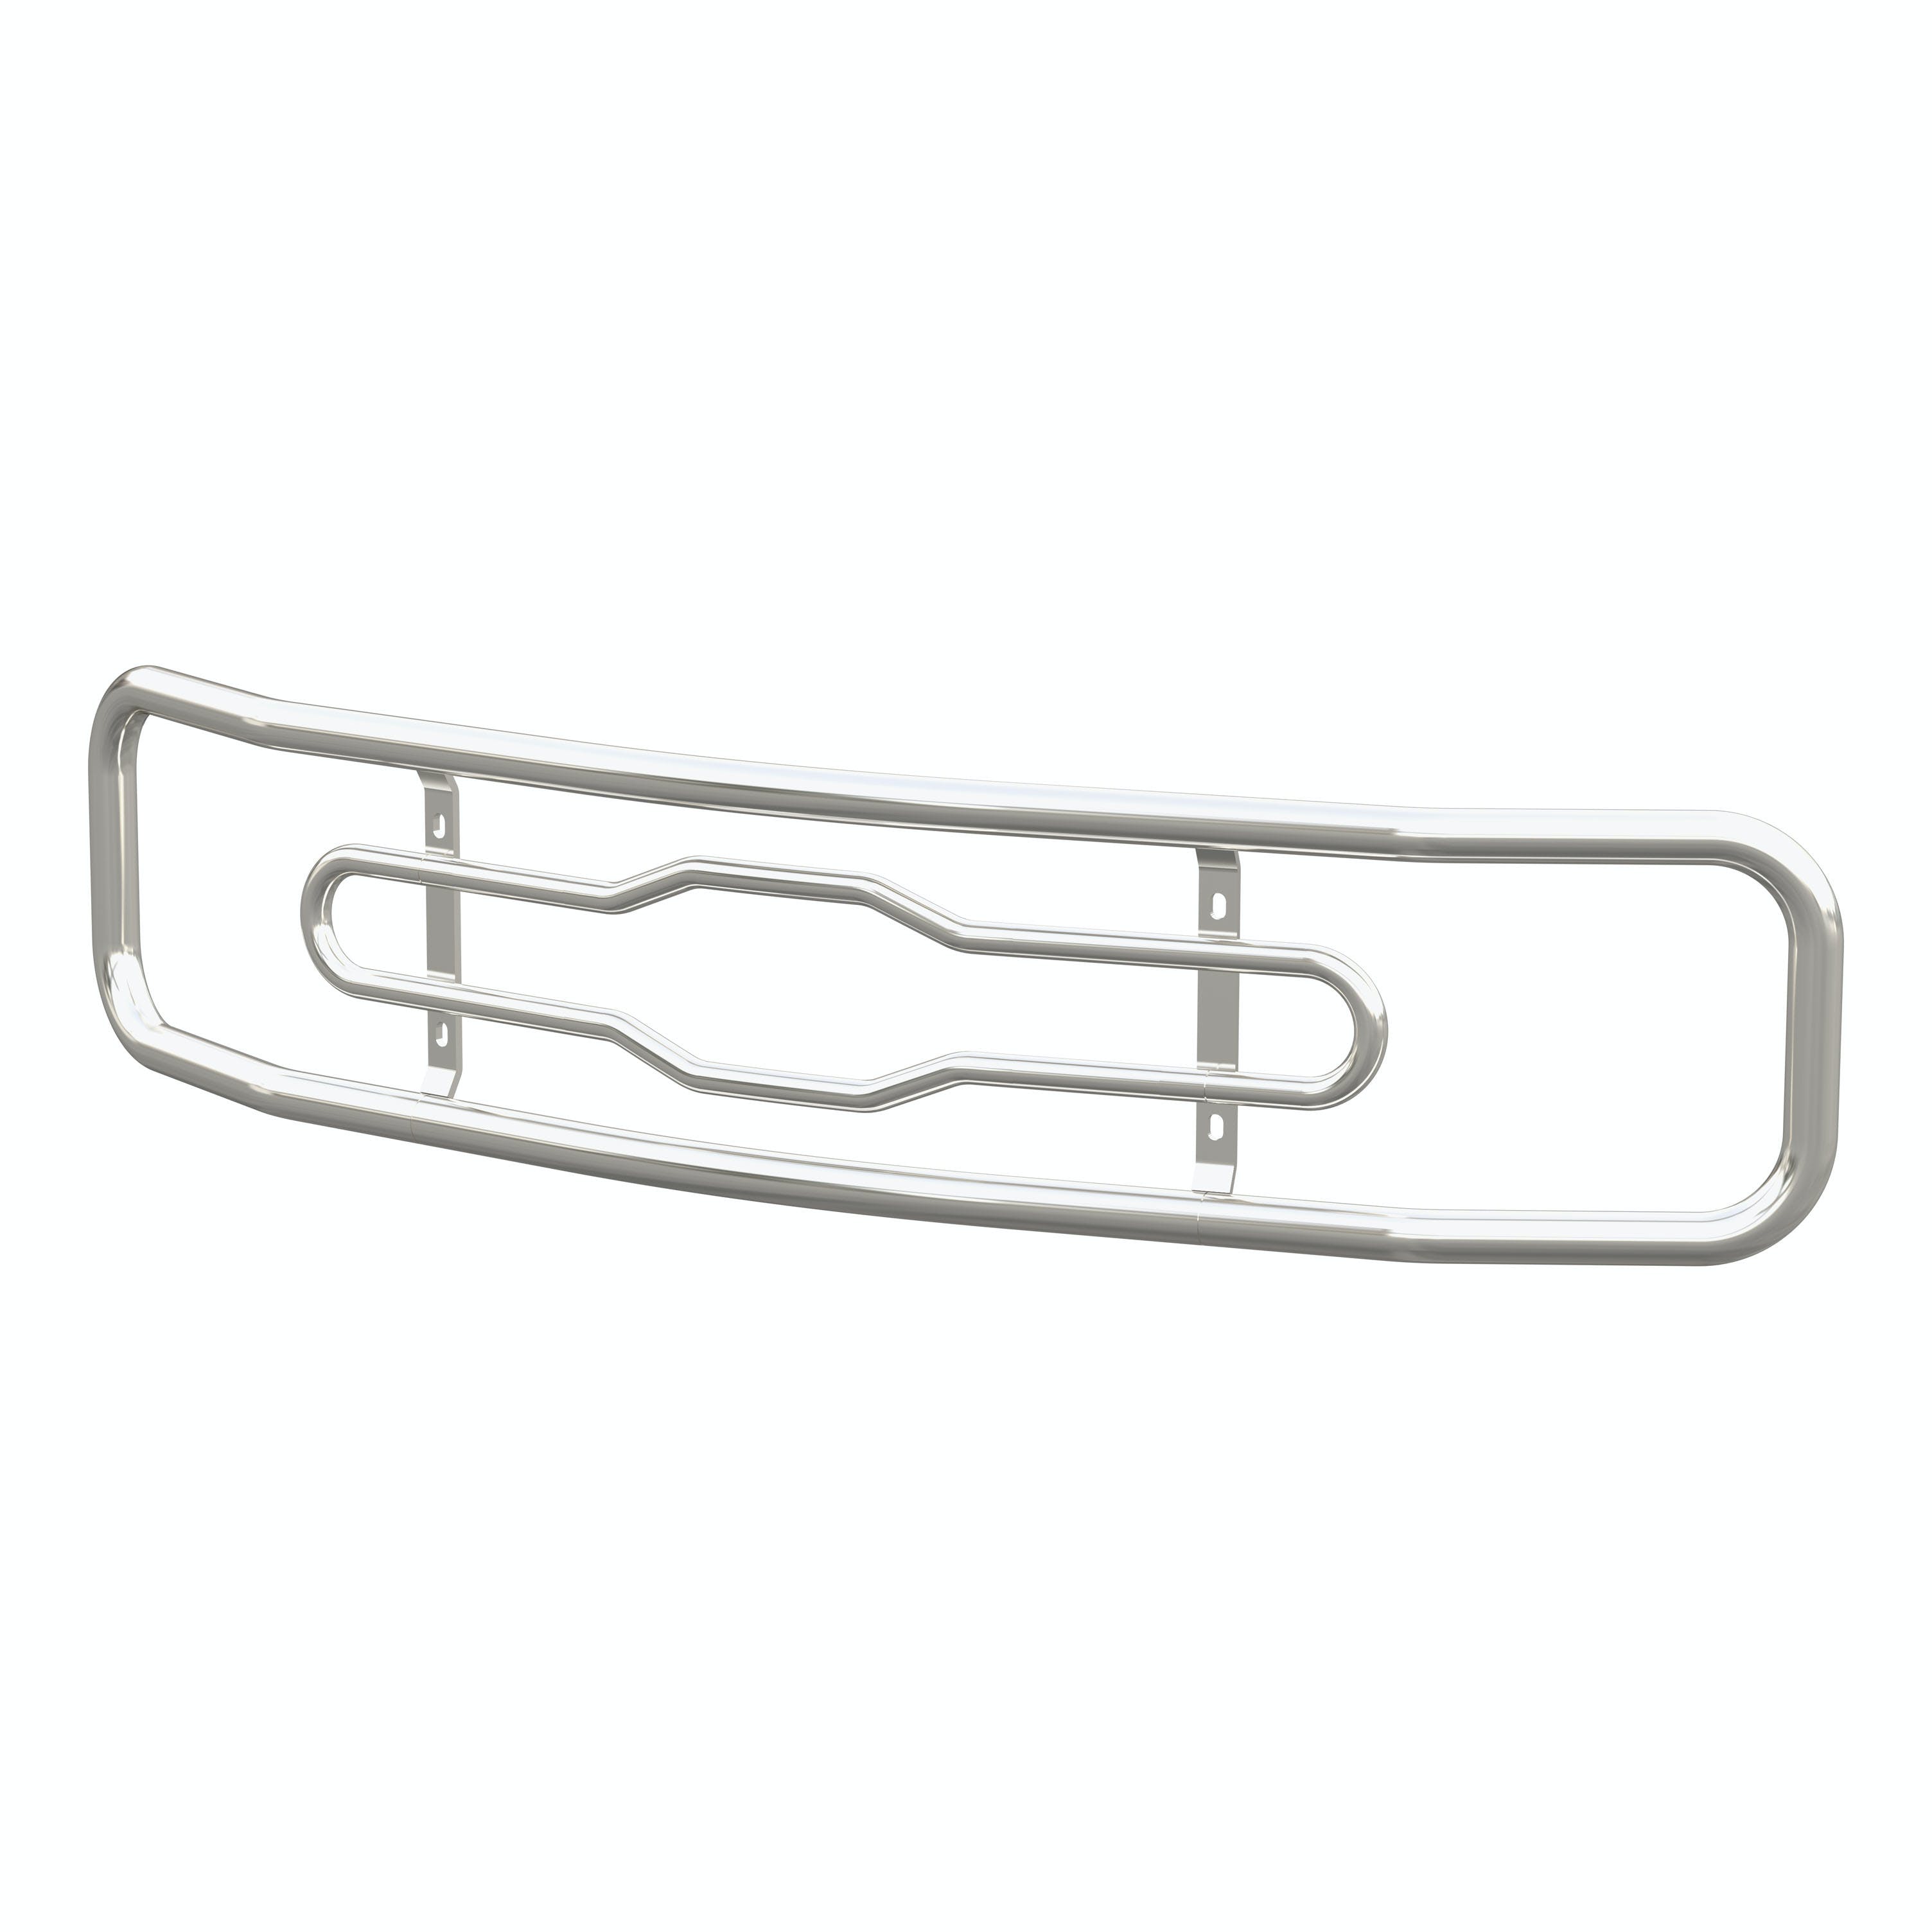 LUVERNE 331443 2 inch Tubular Grille Guard Ring Assembly